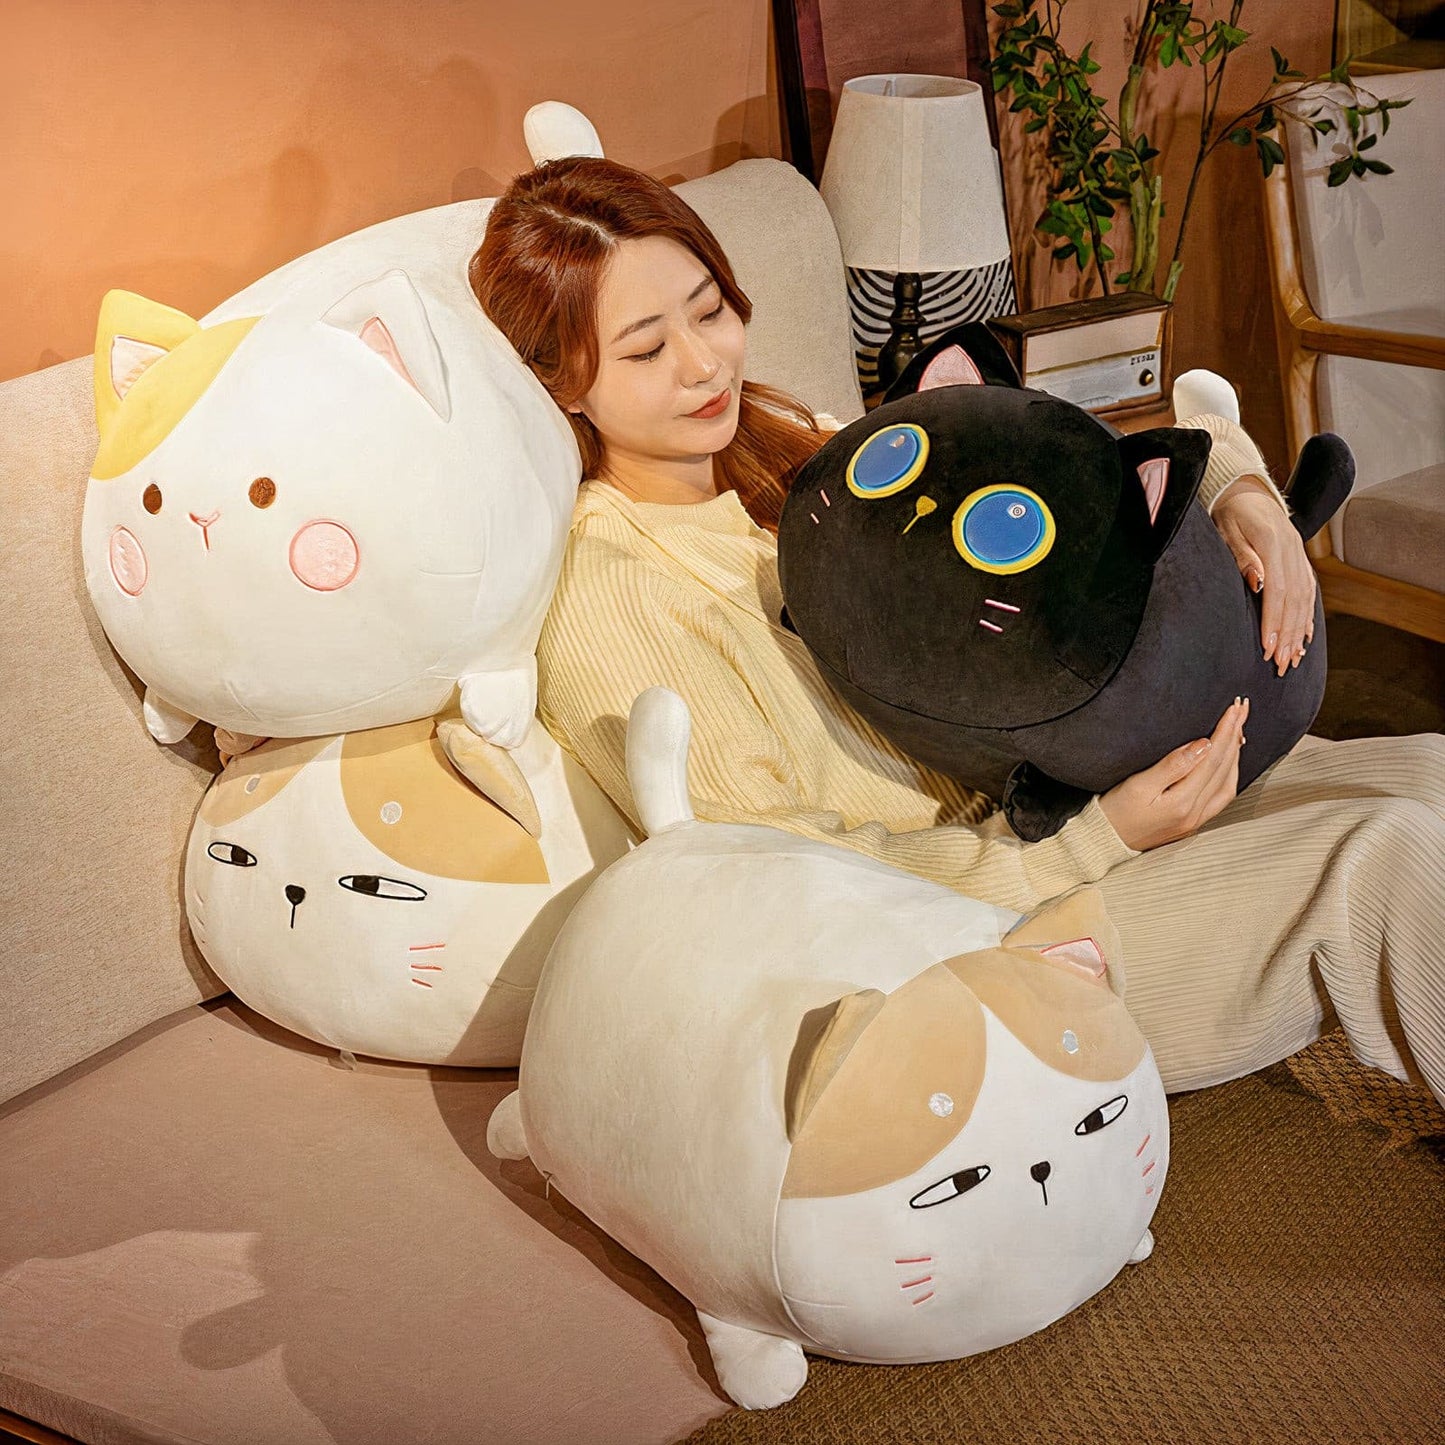 Gigantic Plumpy Adorable Cats Collection